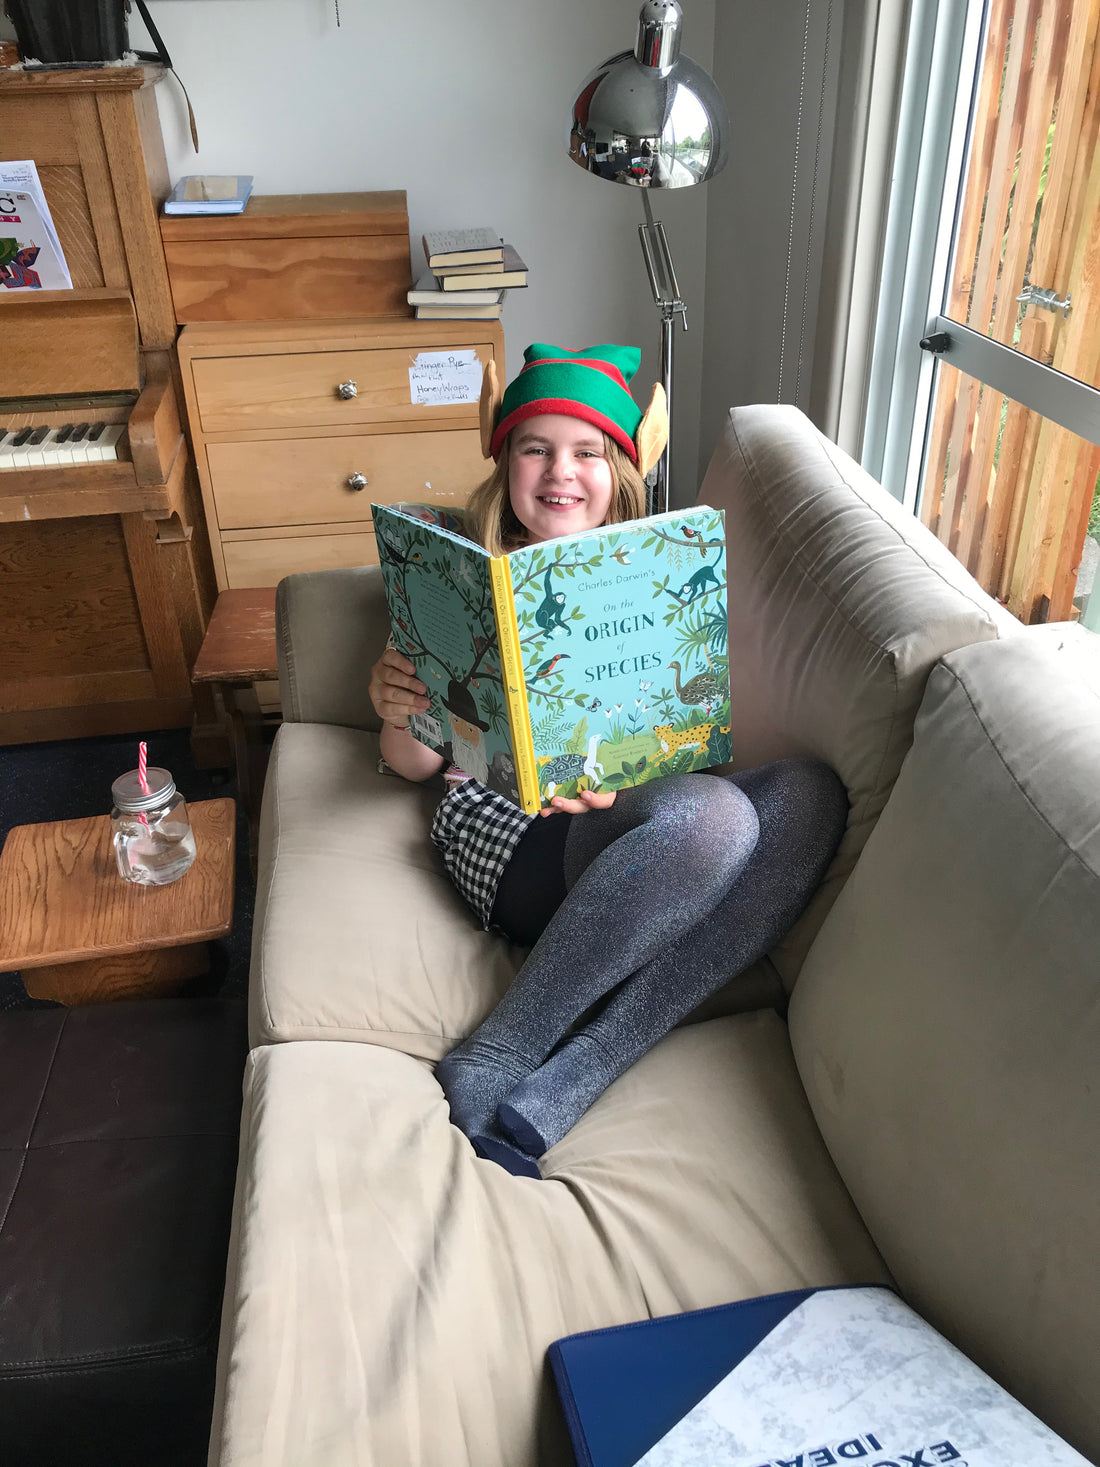 A 11 year old girl wearing a Christmas hat sitting on a sofa reading a book